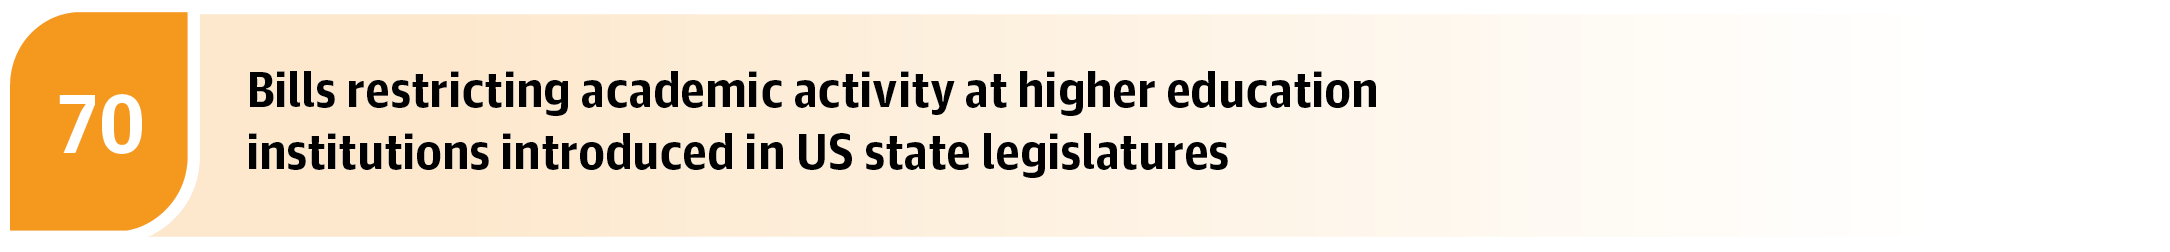 Bills restricting academic activity at higher education institutions introduced in US state legislatures